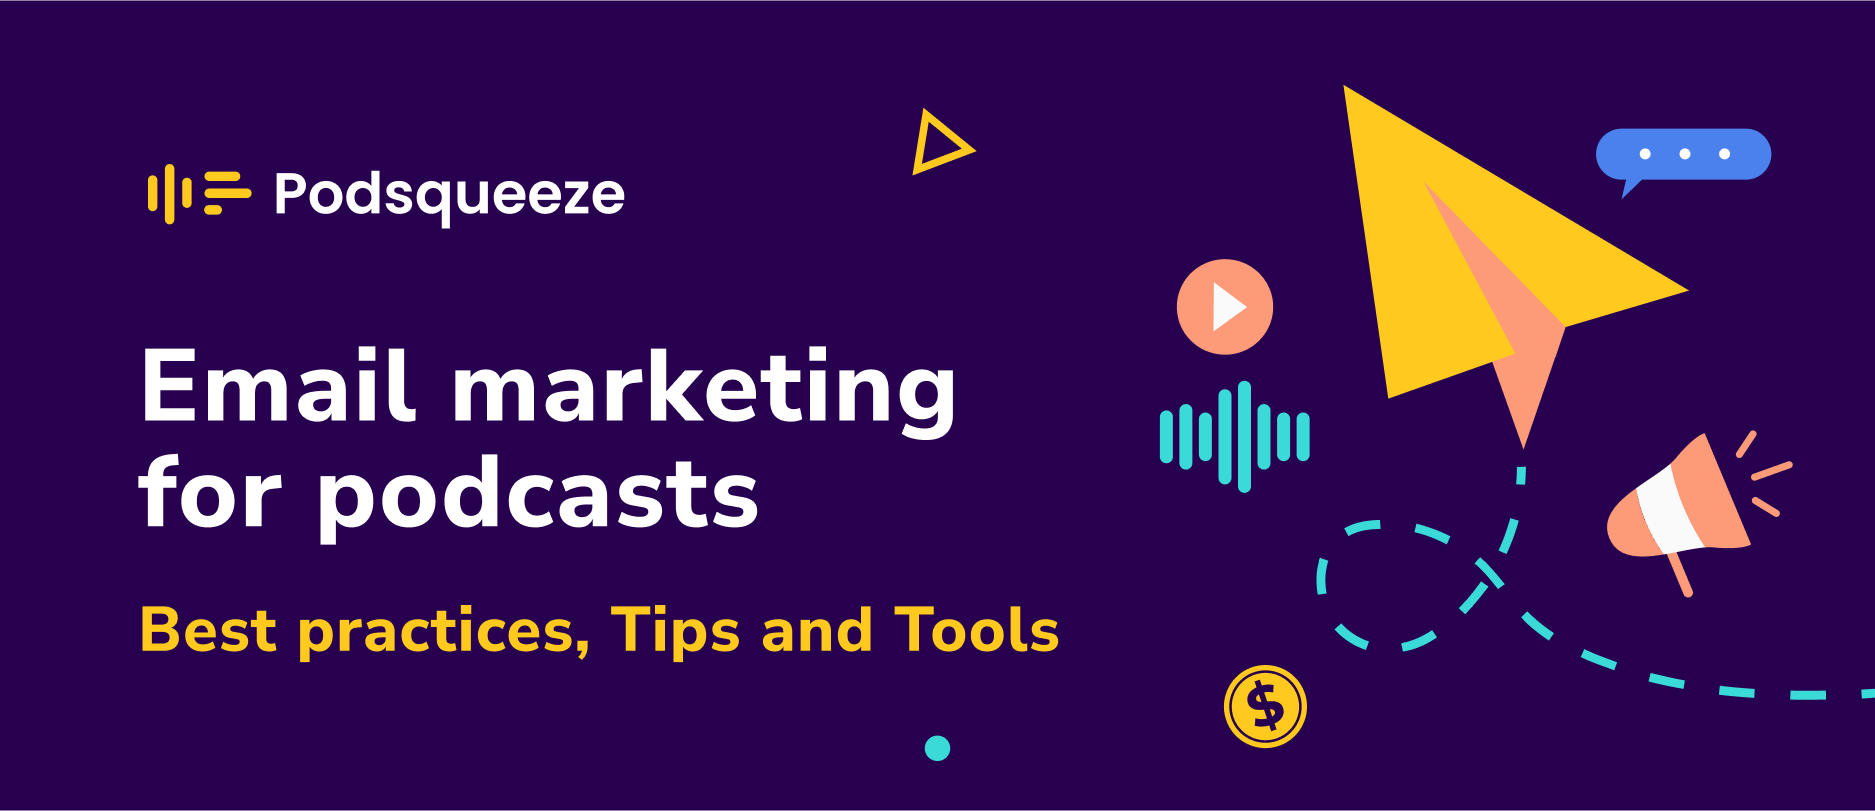 email-marketing-for-podcasts-article-cover